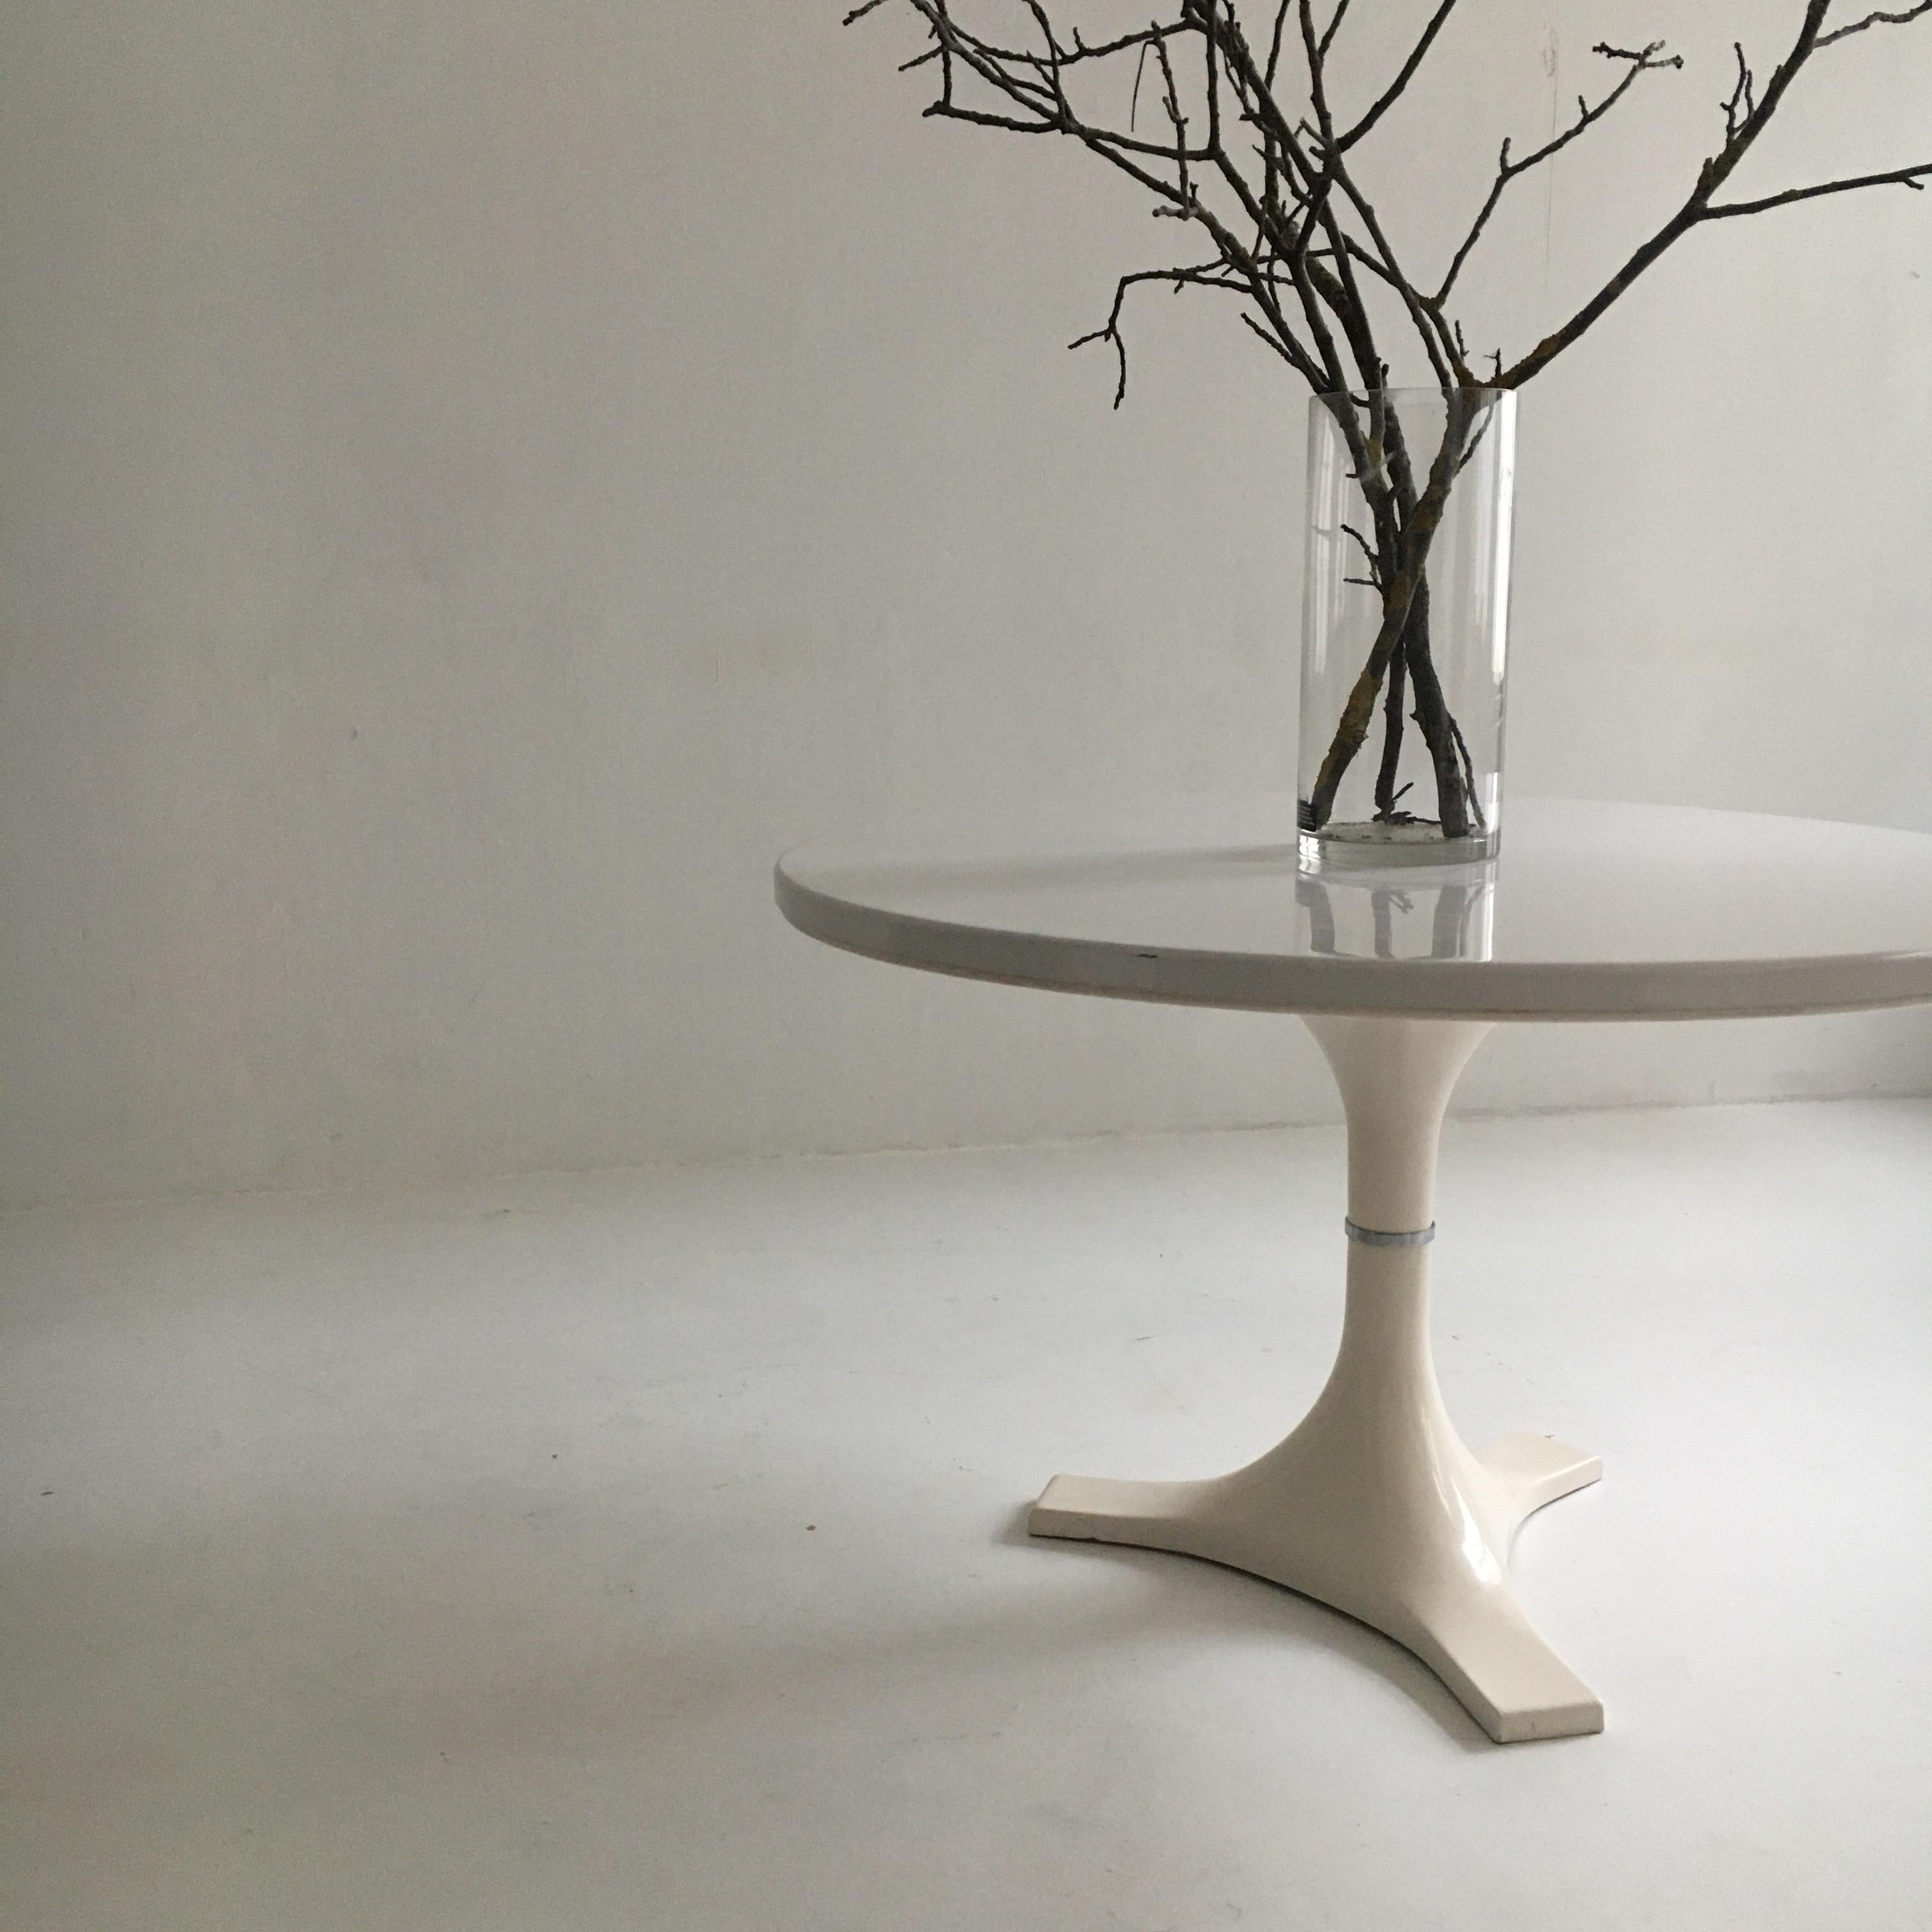 Dining Table by Anna Castelli Ferrieri, Ignazio Gardella for Kartell, Italy 1965 In Good Condition For Sale In Vienna, AT